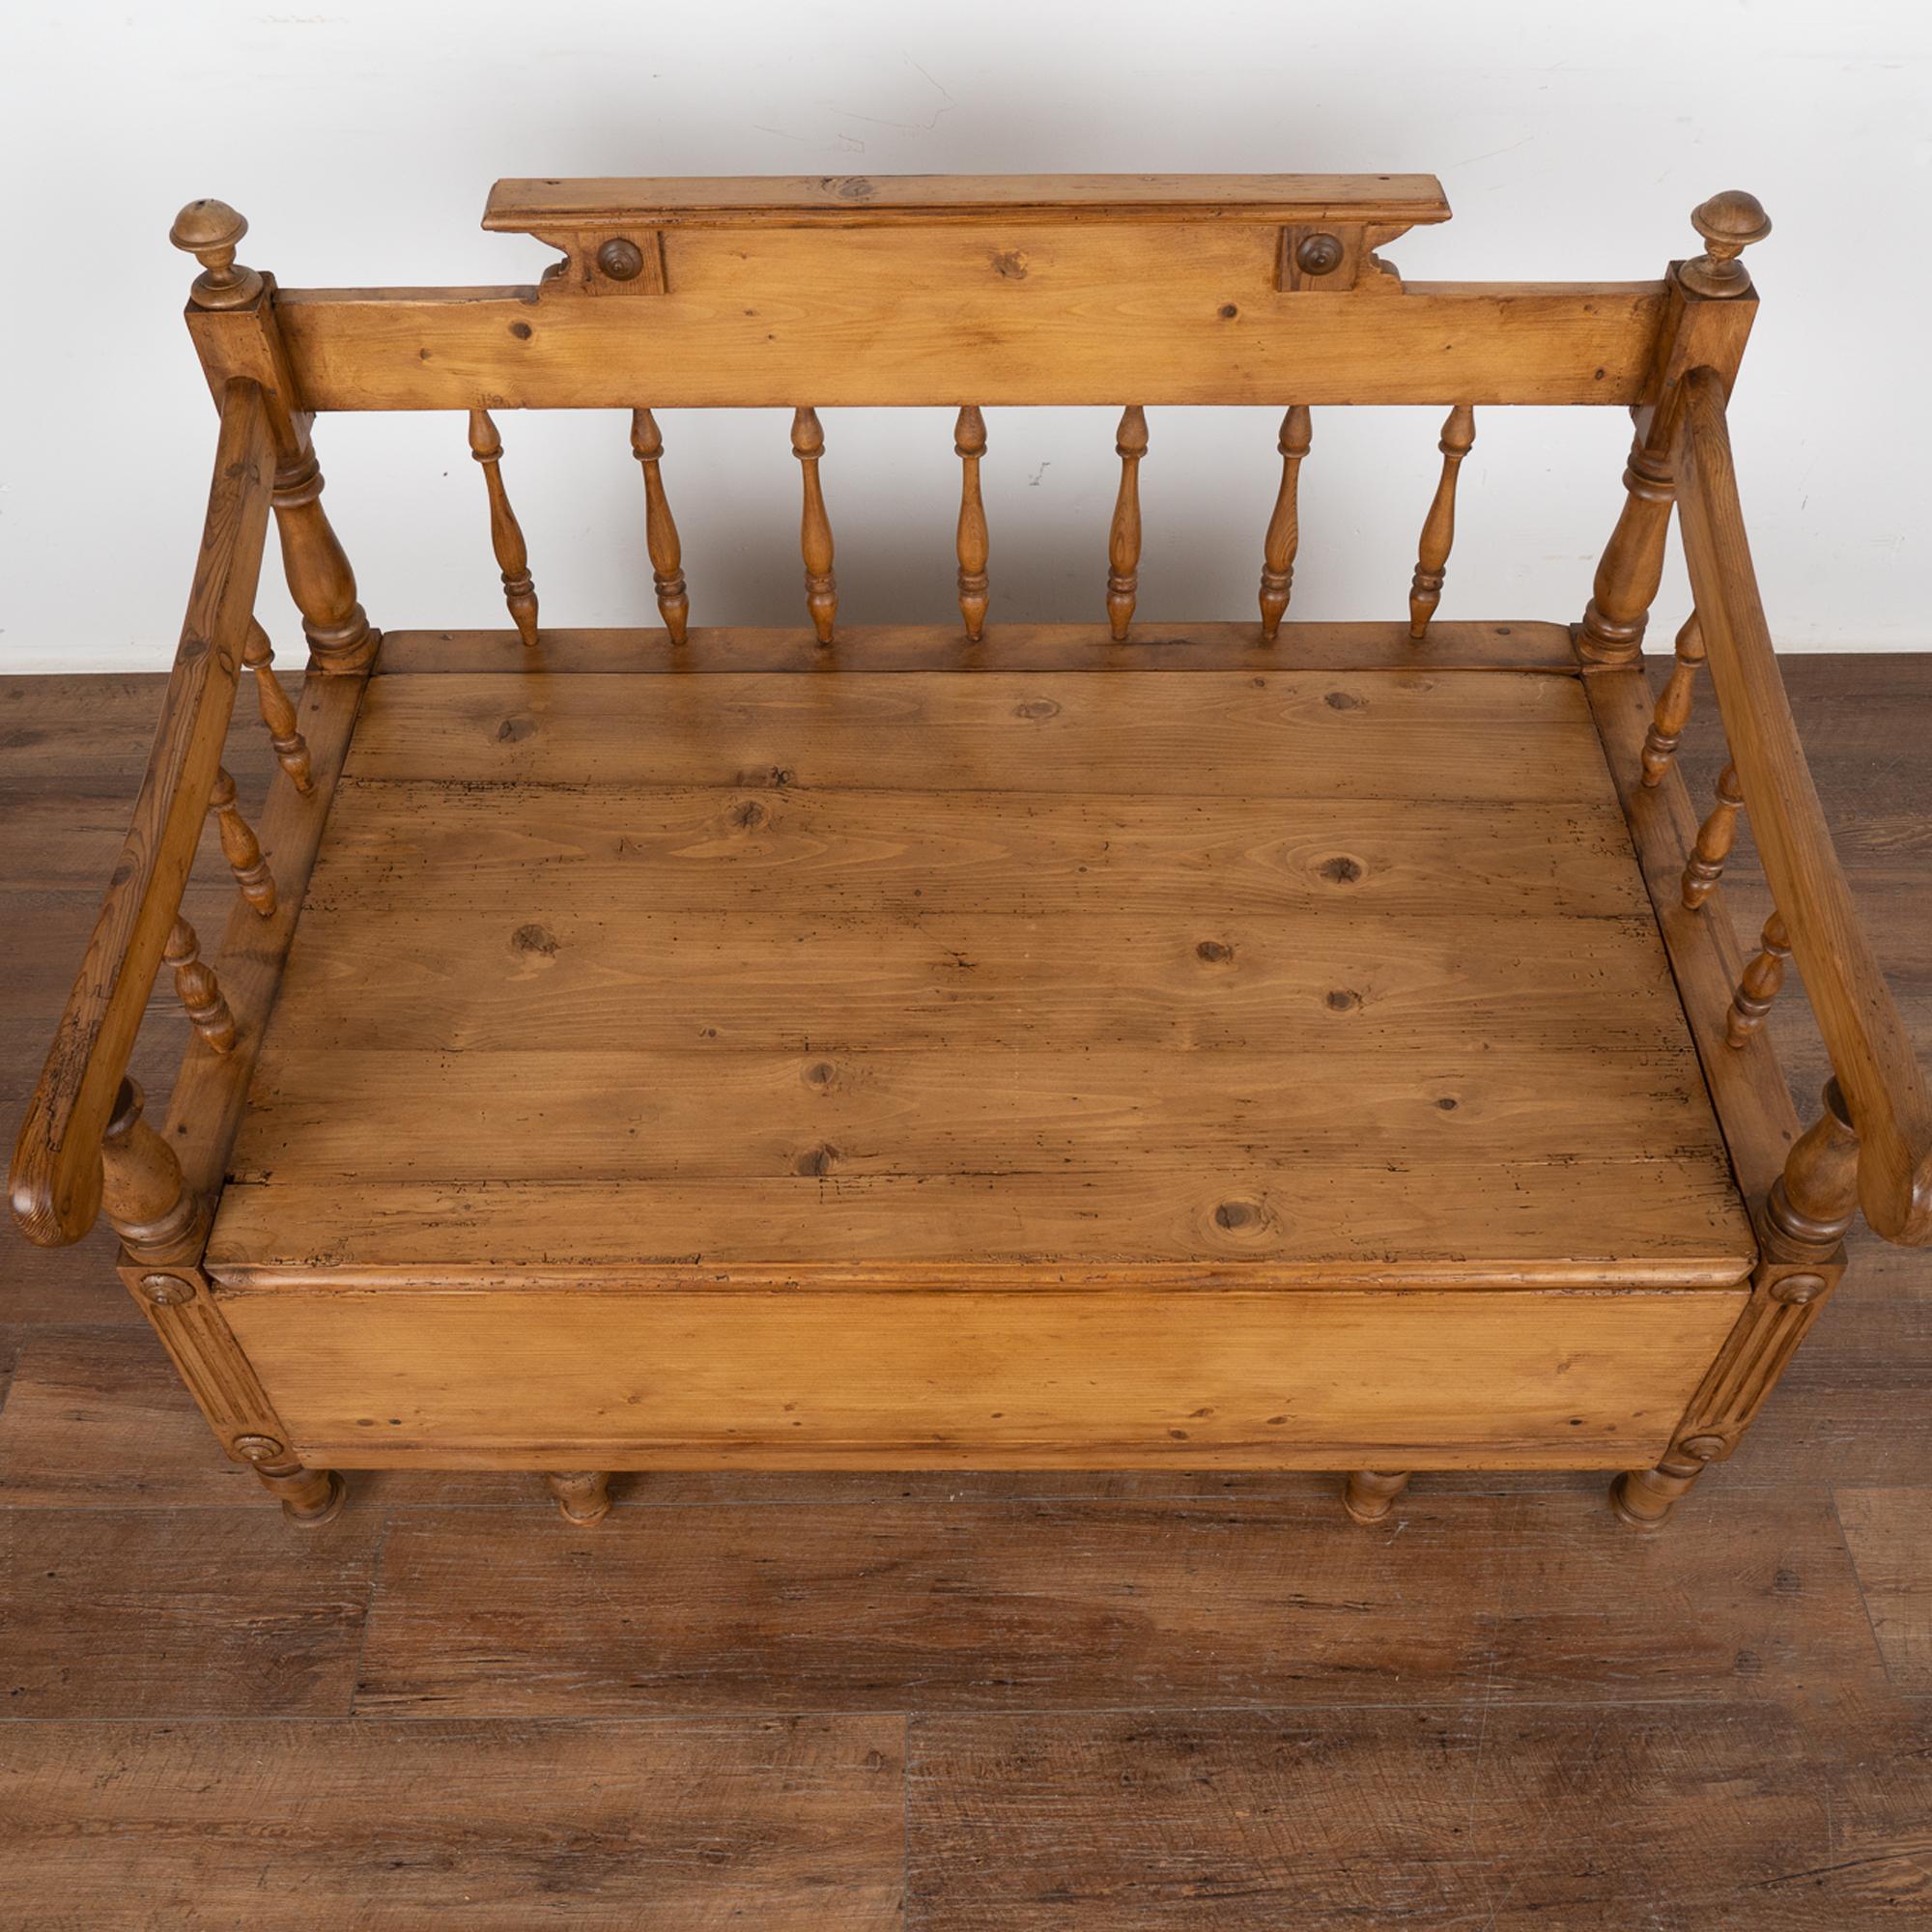 Country Small Pine Bench With Storage, Sweden Circa 1840-60